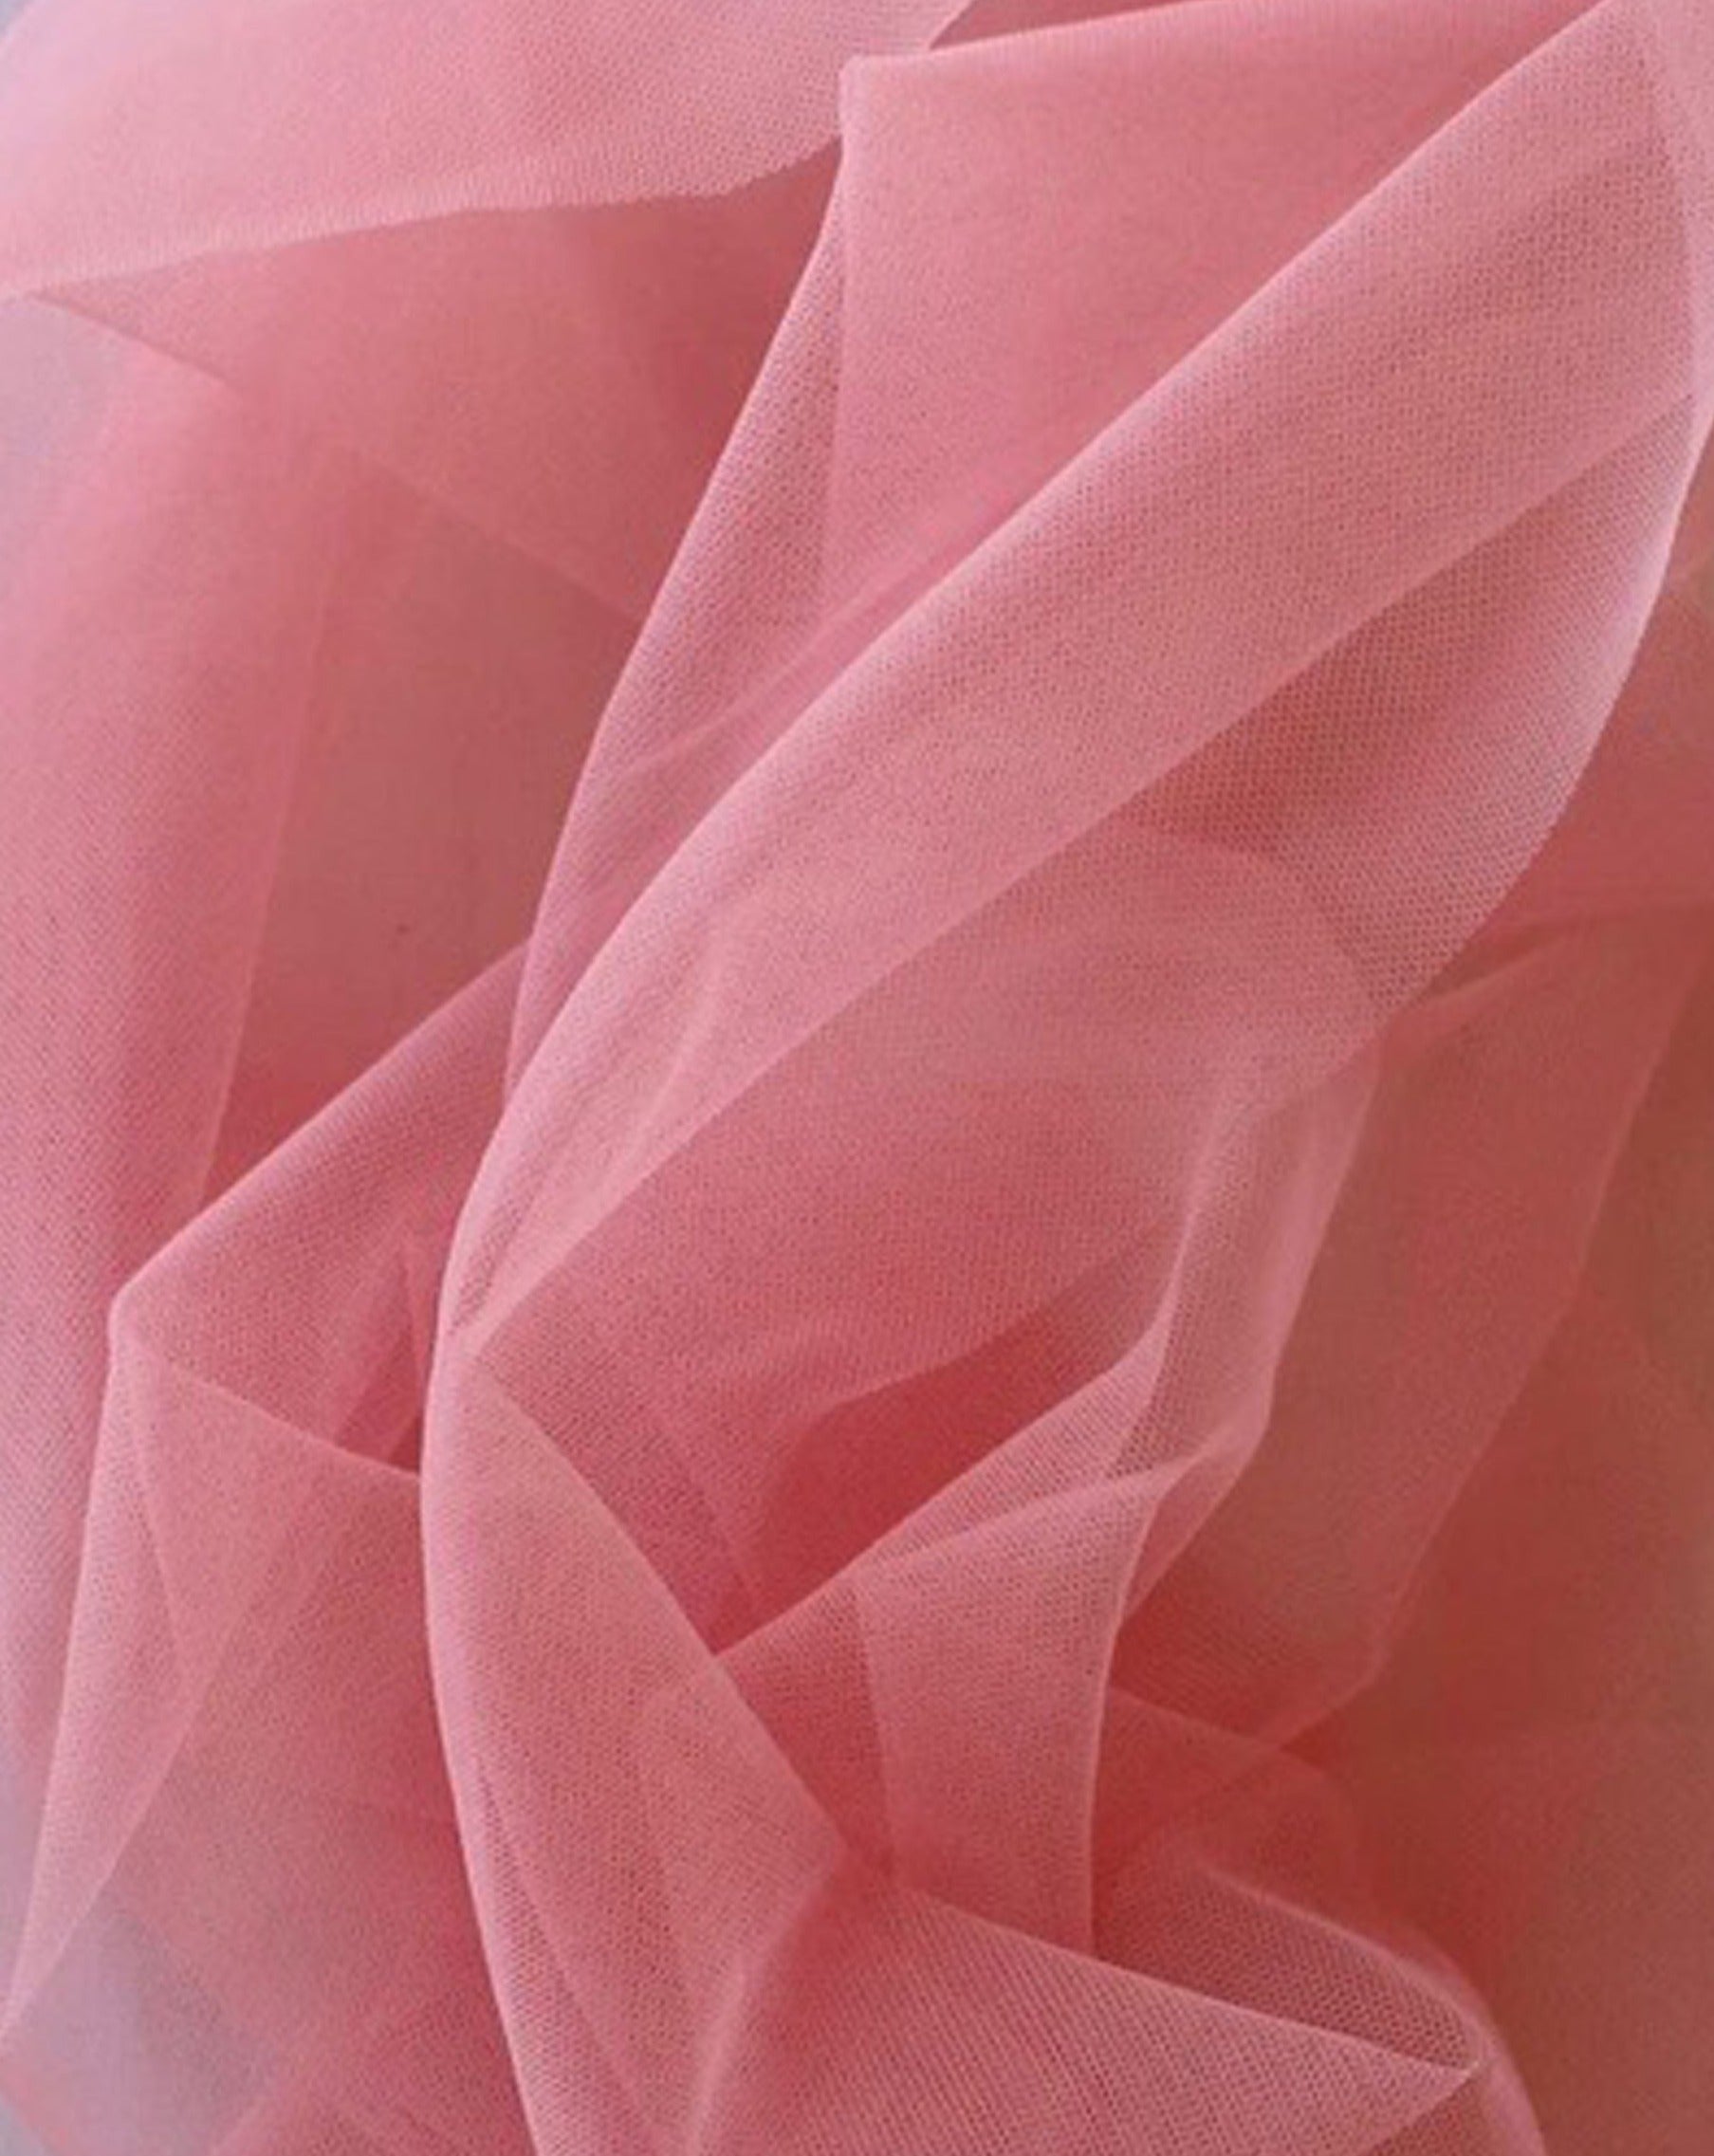 Close up of Rubies Bras pink tulle fabric.